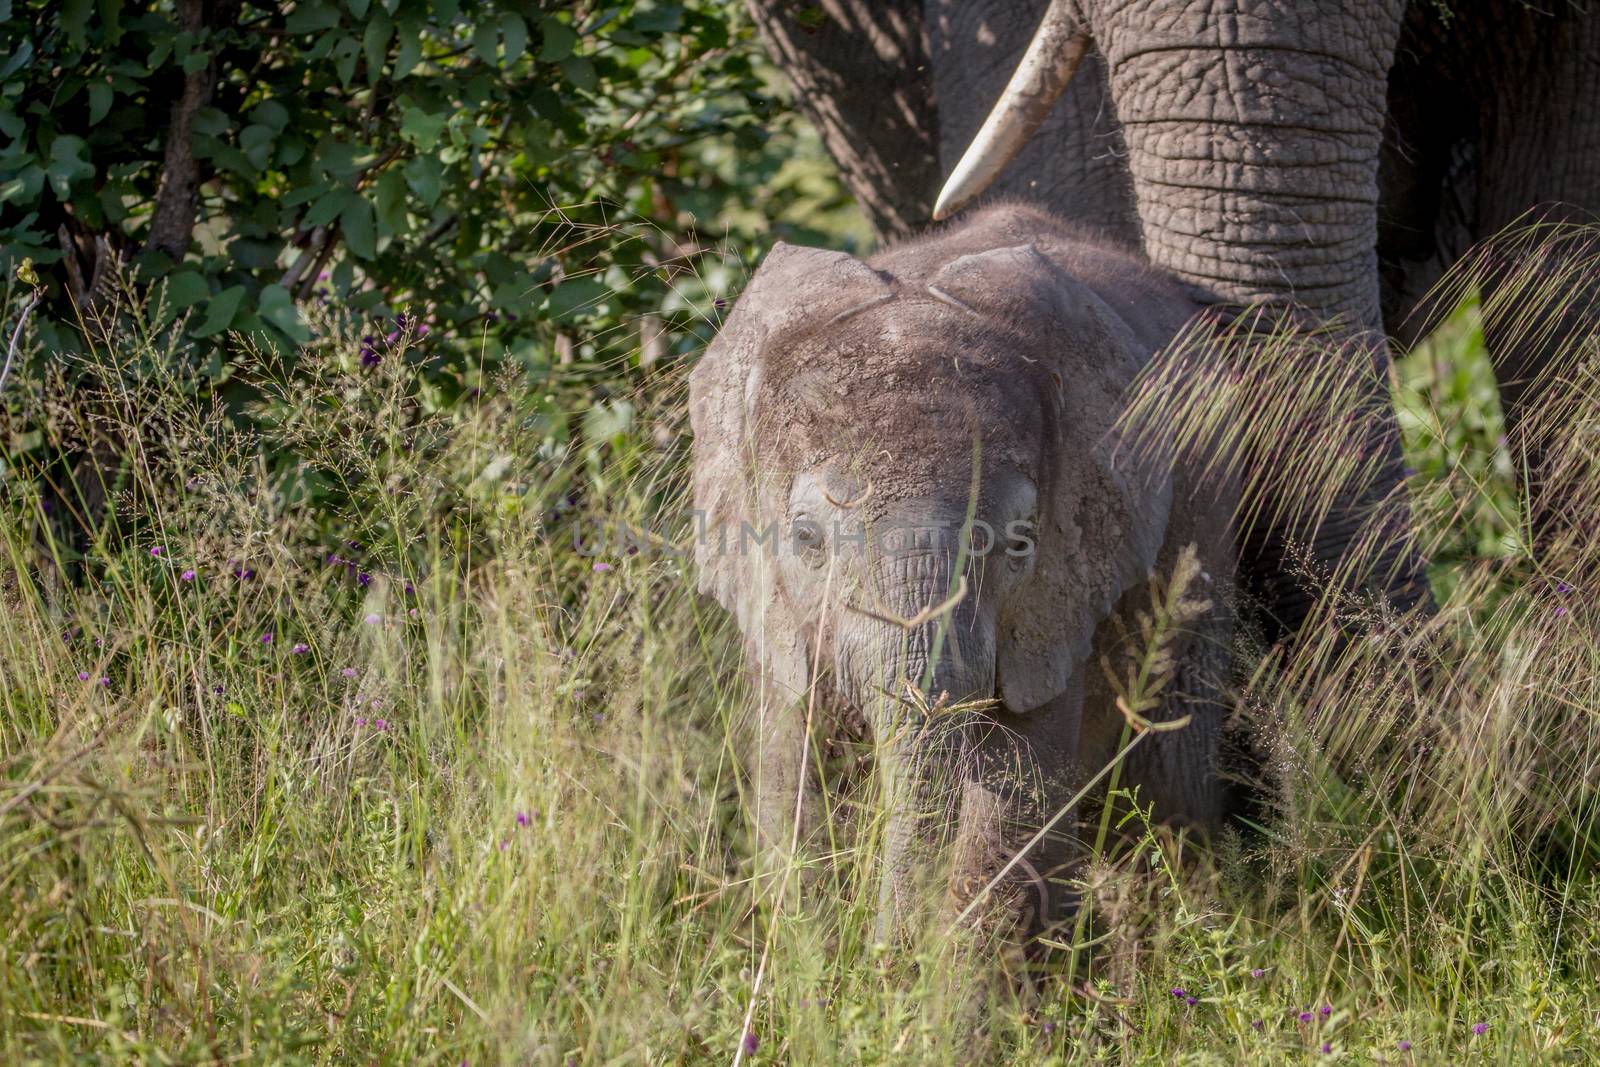 Baby Elephant in between the high grass in the Chobe National Park, Botswana.